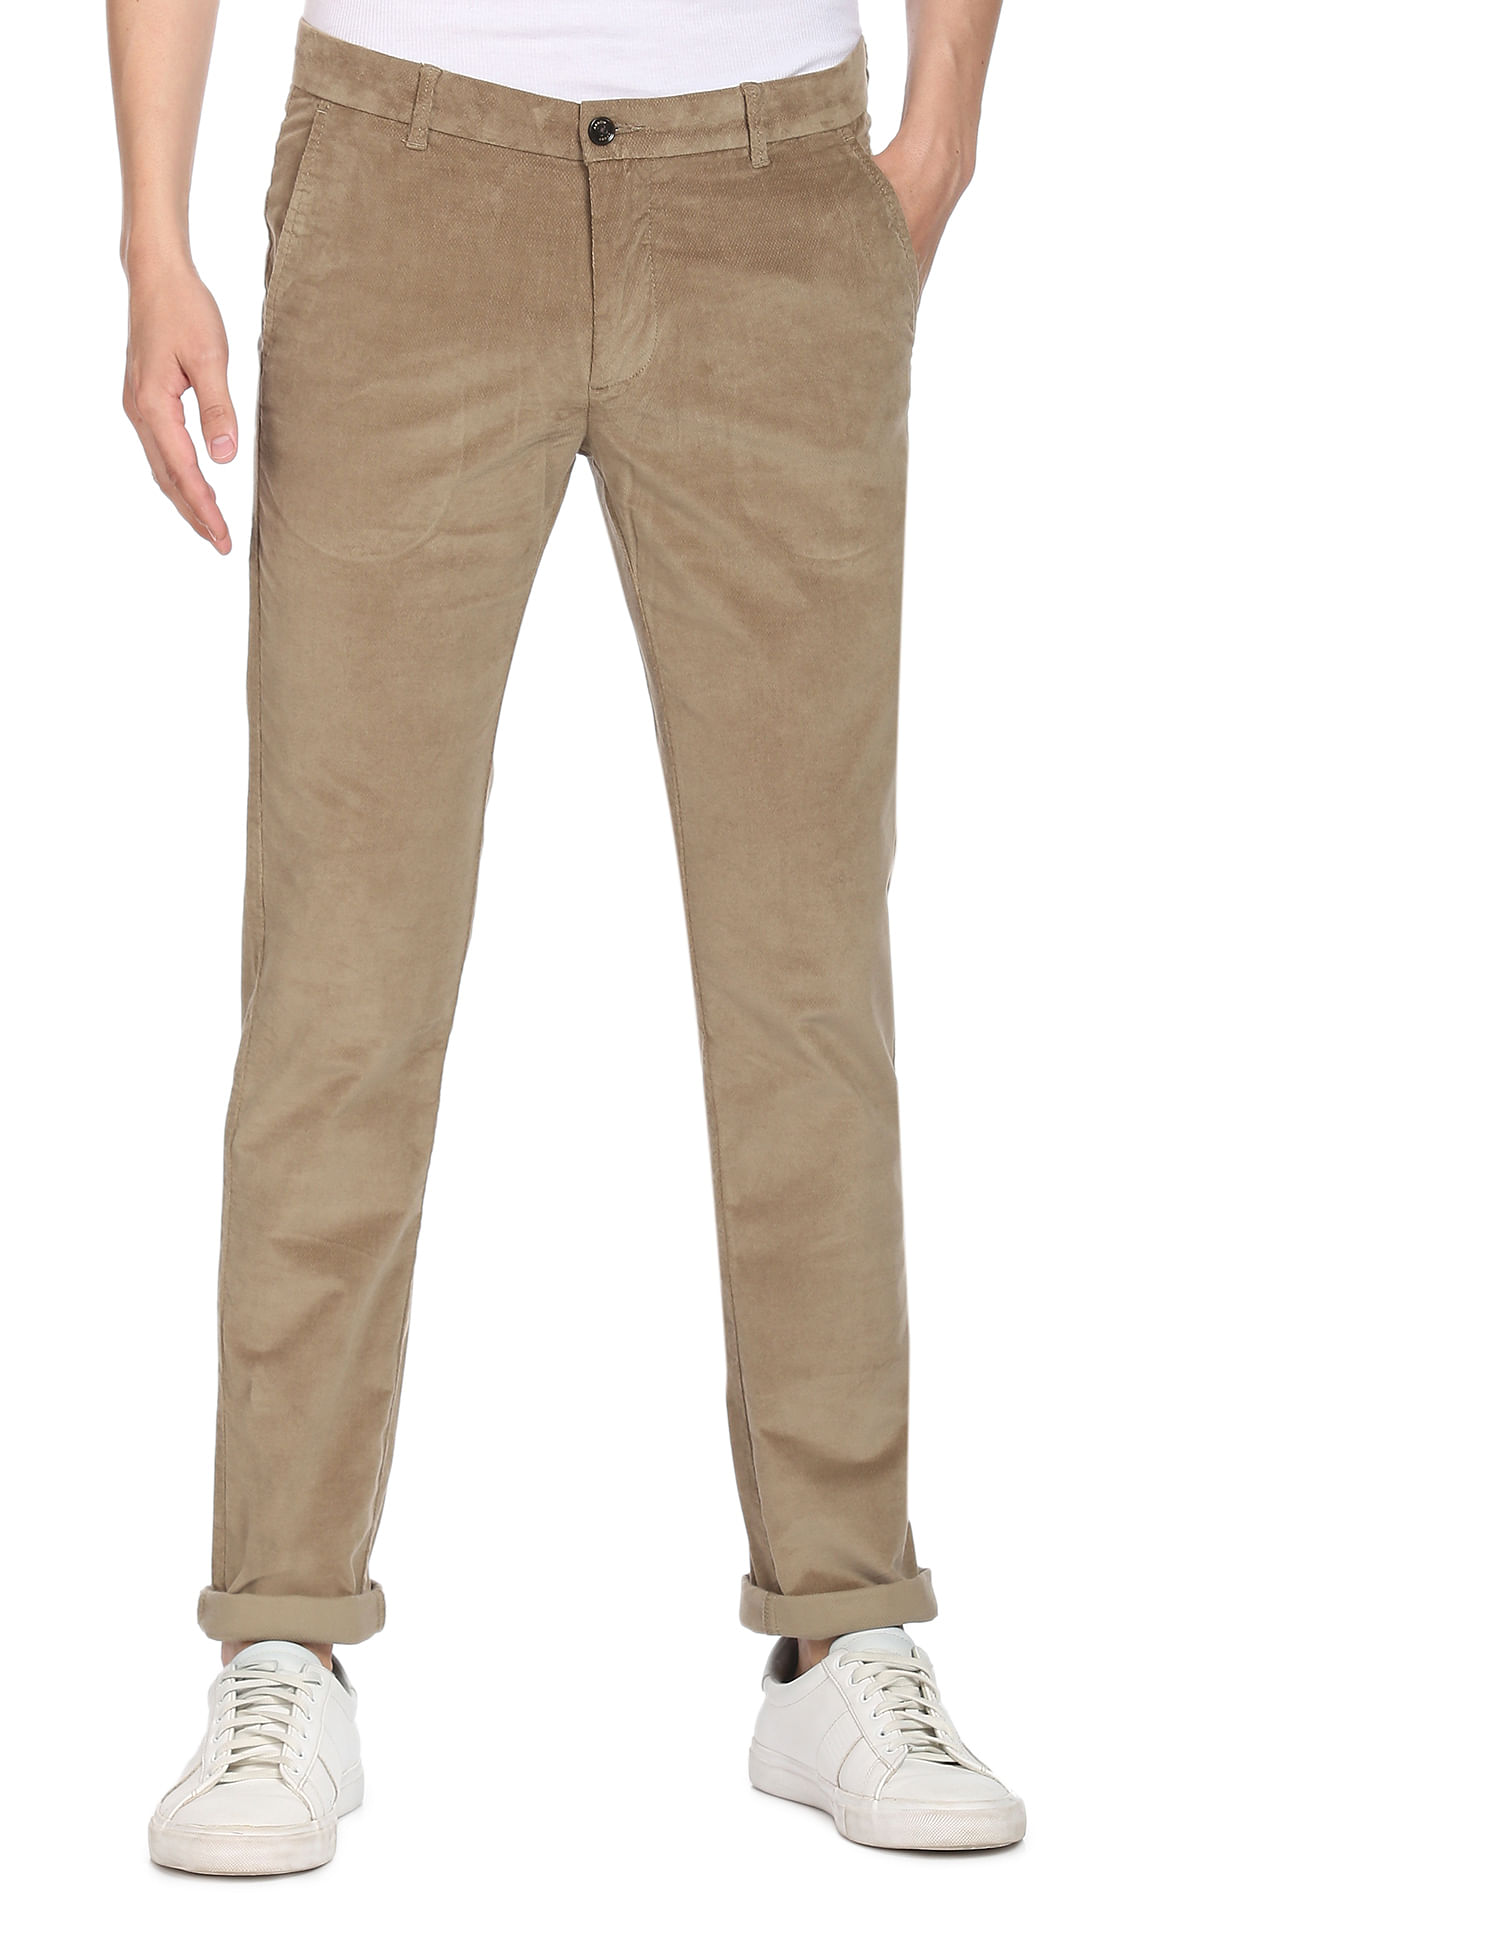 Buy Arrow Sports Mid Rise Patterned Trousers - NNNOW.com